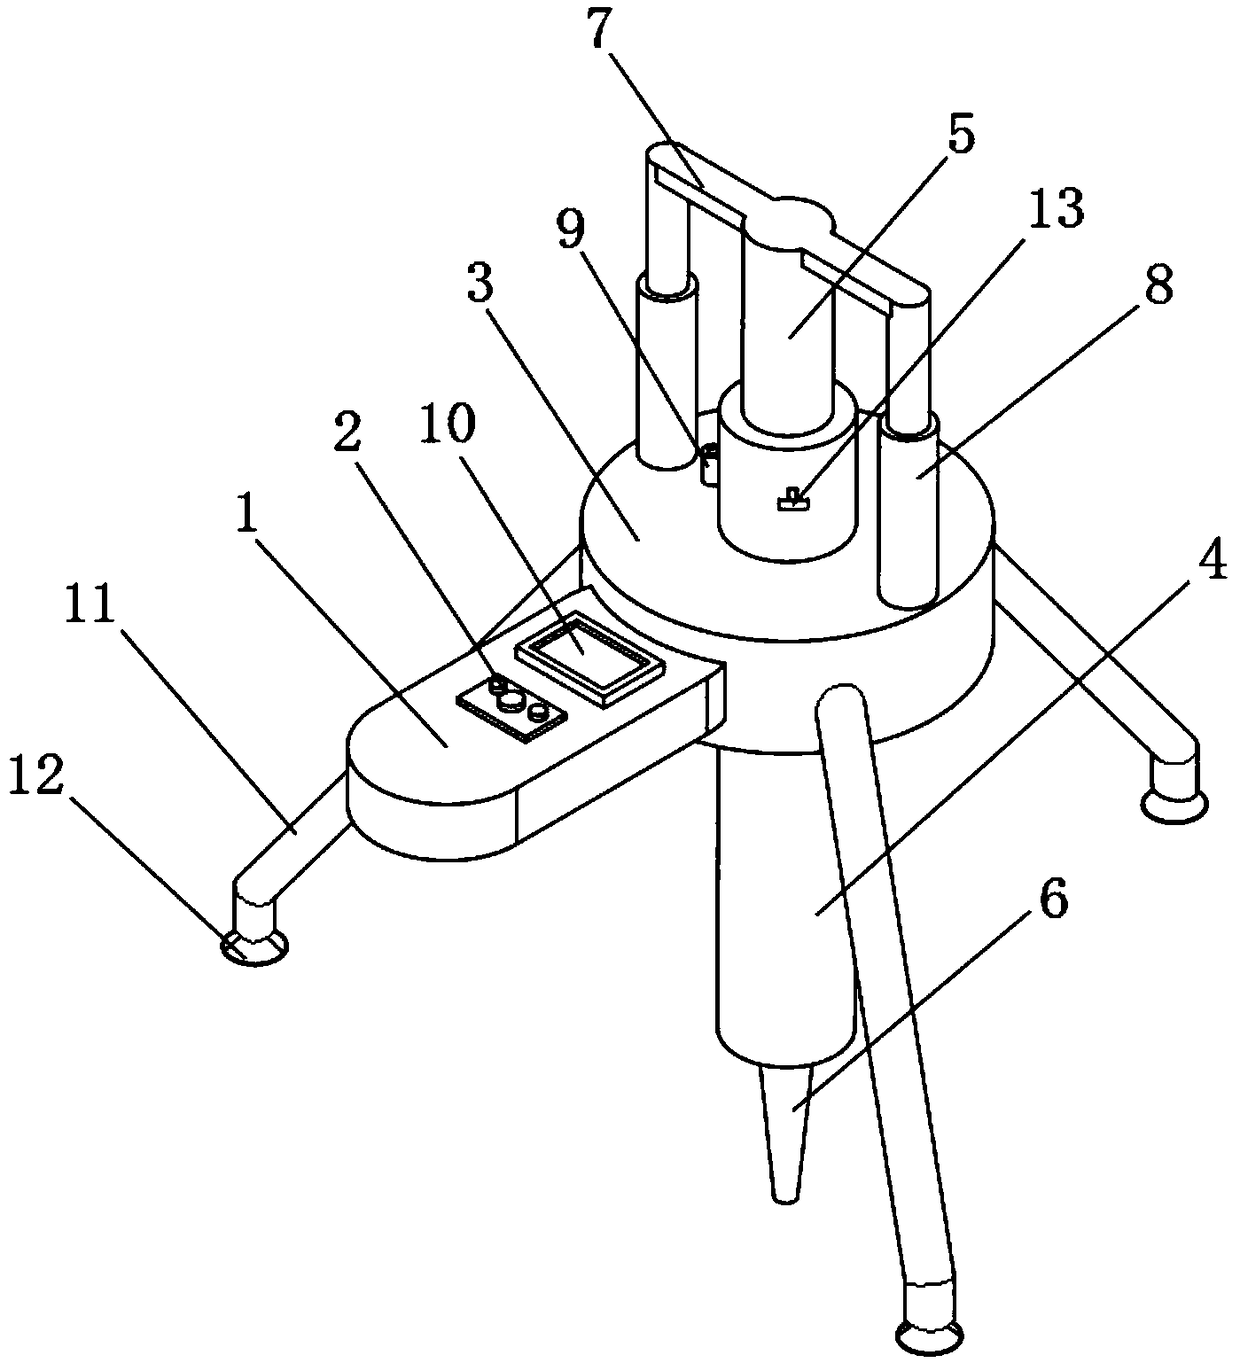 Stomach enterochirurgia abdominal cavity operation puncture device